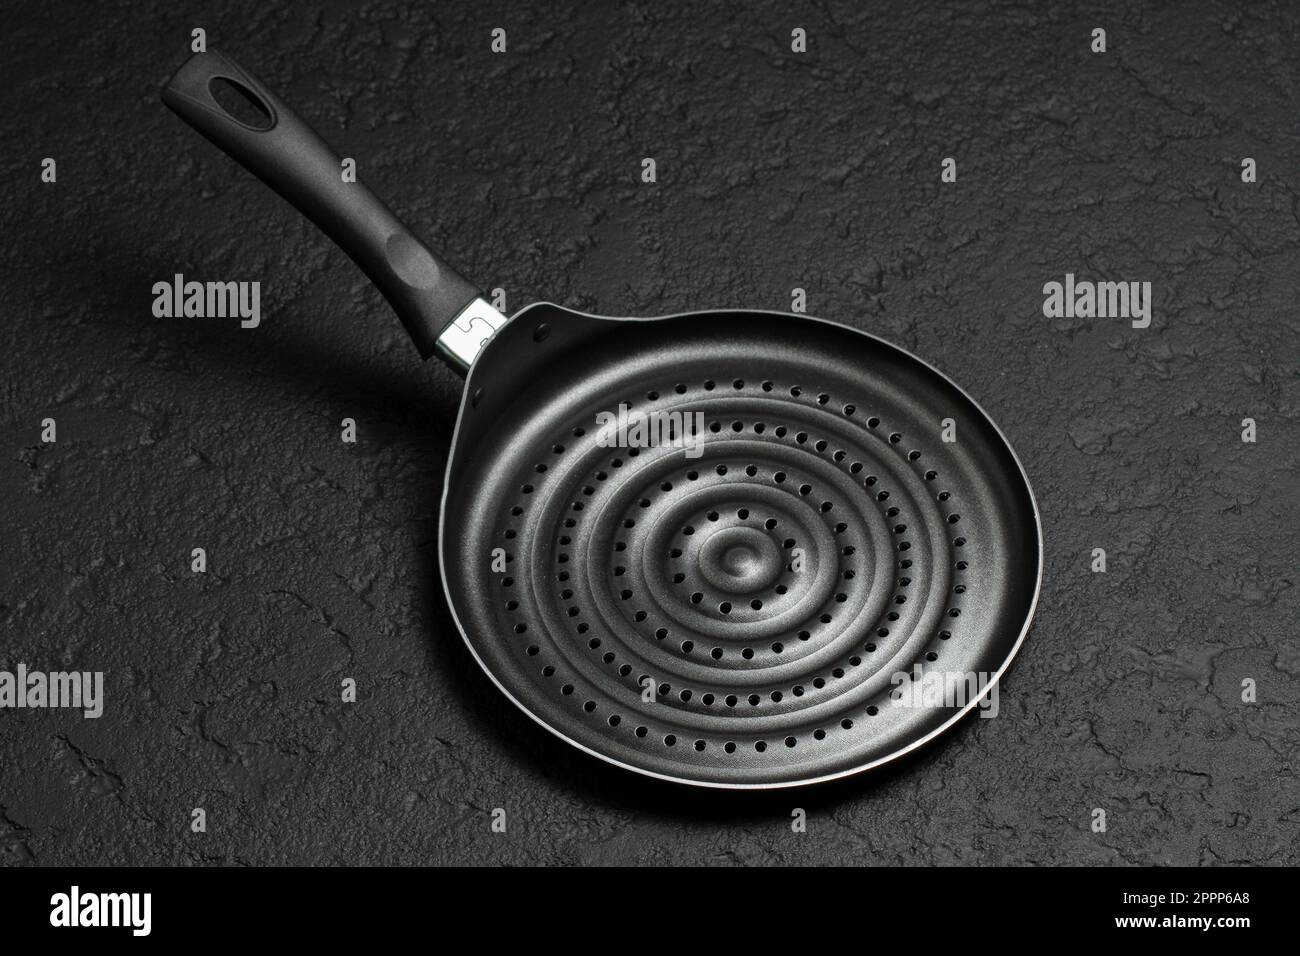 https://c8.alamy.com/comp/2PPP6A8/grill-or-frying-pan-for-roasting-arepas-or-tortillas-top-view-2PPP6A8.jpg